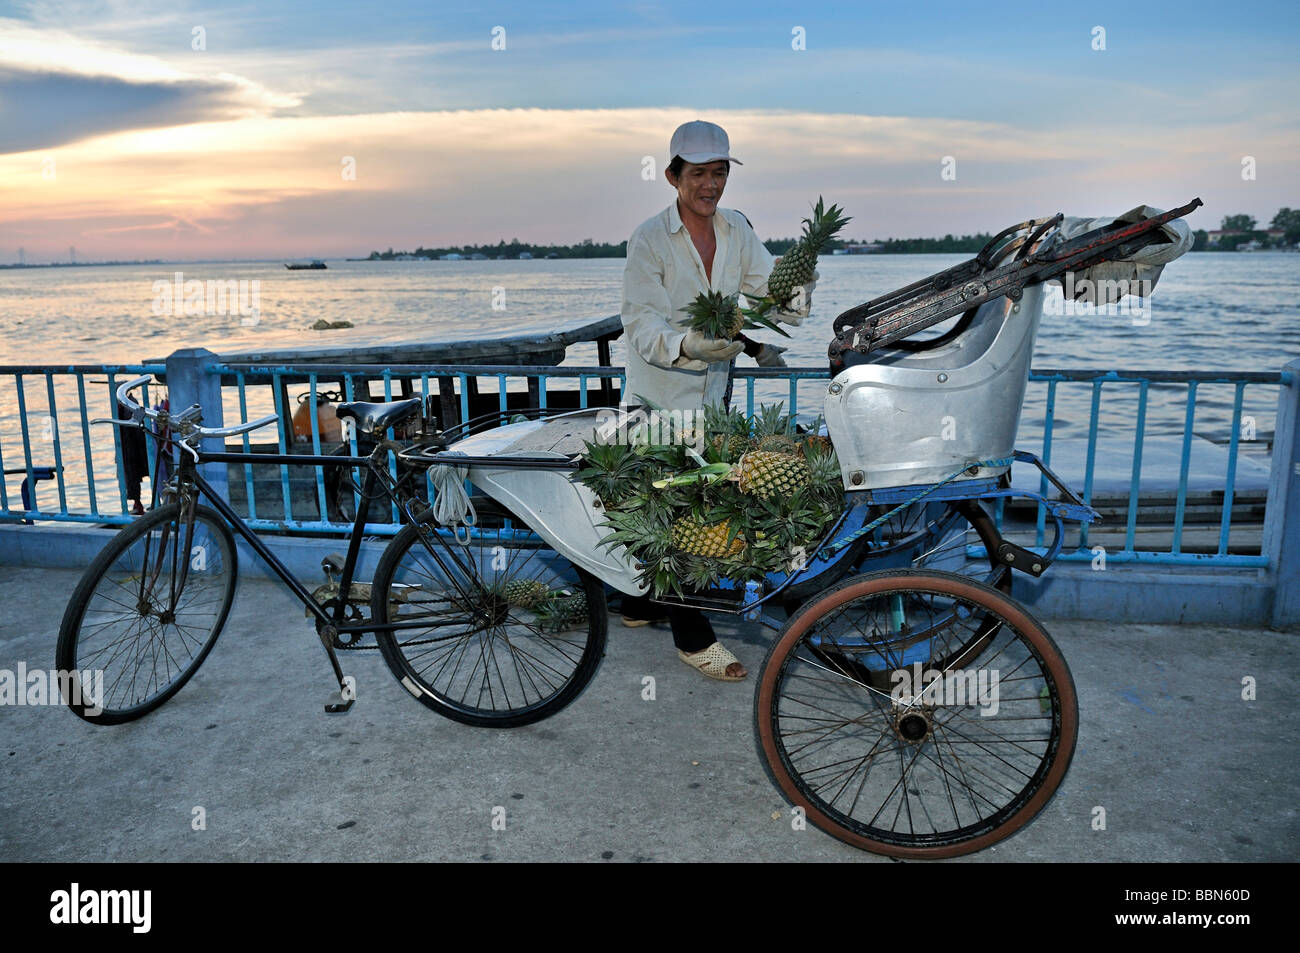 Man stacking many pineapples on the seat of a bicycle rickshaw, Mekong Delta, Vietnam, Asia Stock Photo